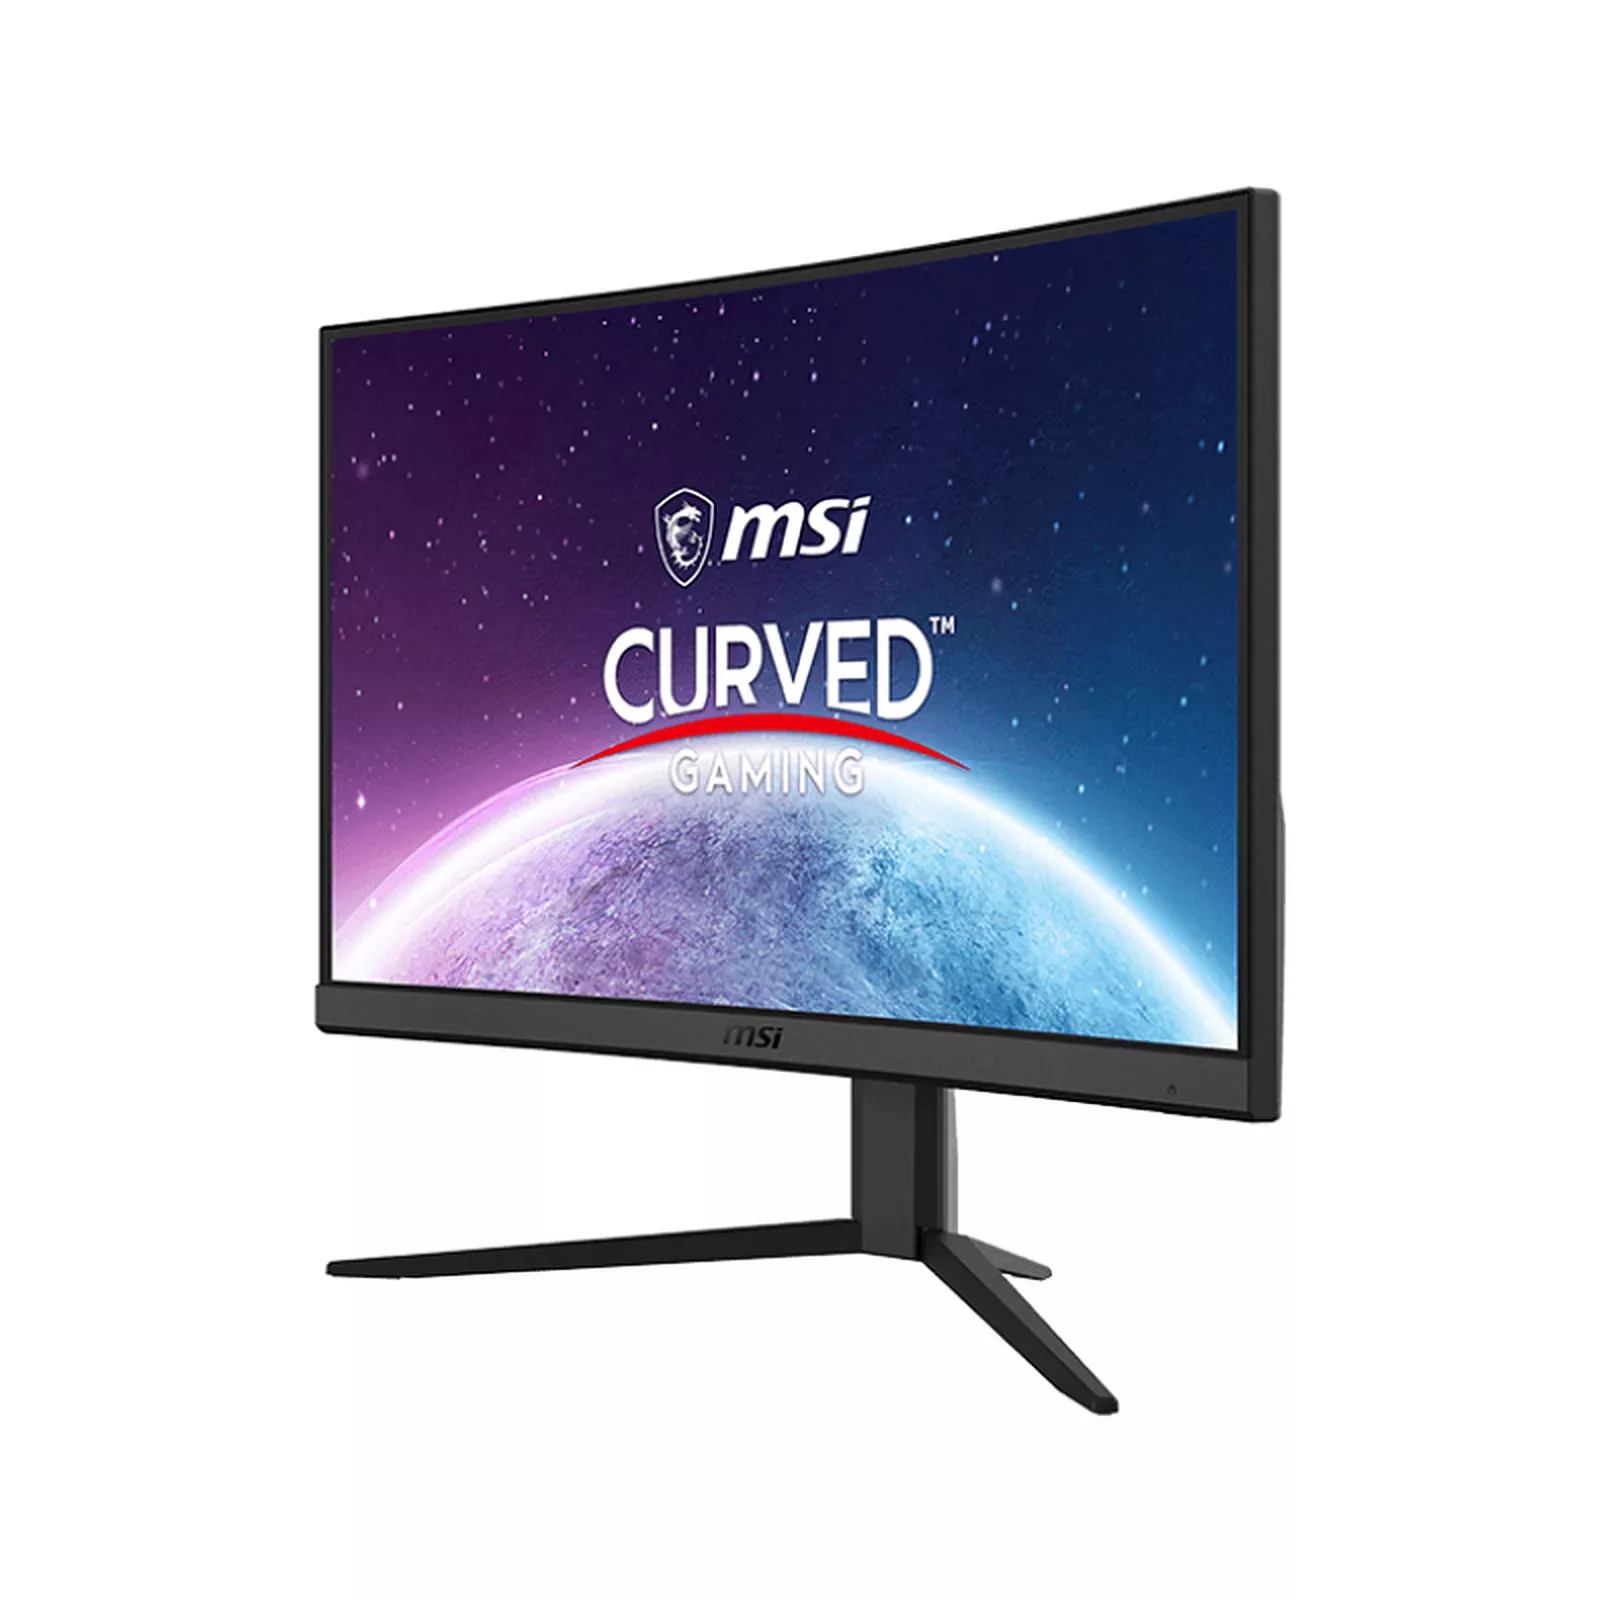 MSI 24" LED - G24C4 E2 FHD | 180Hz | 1ms CURVED